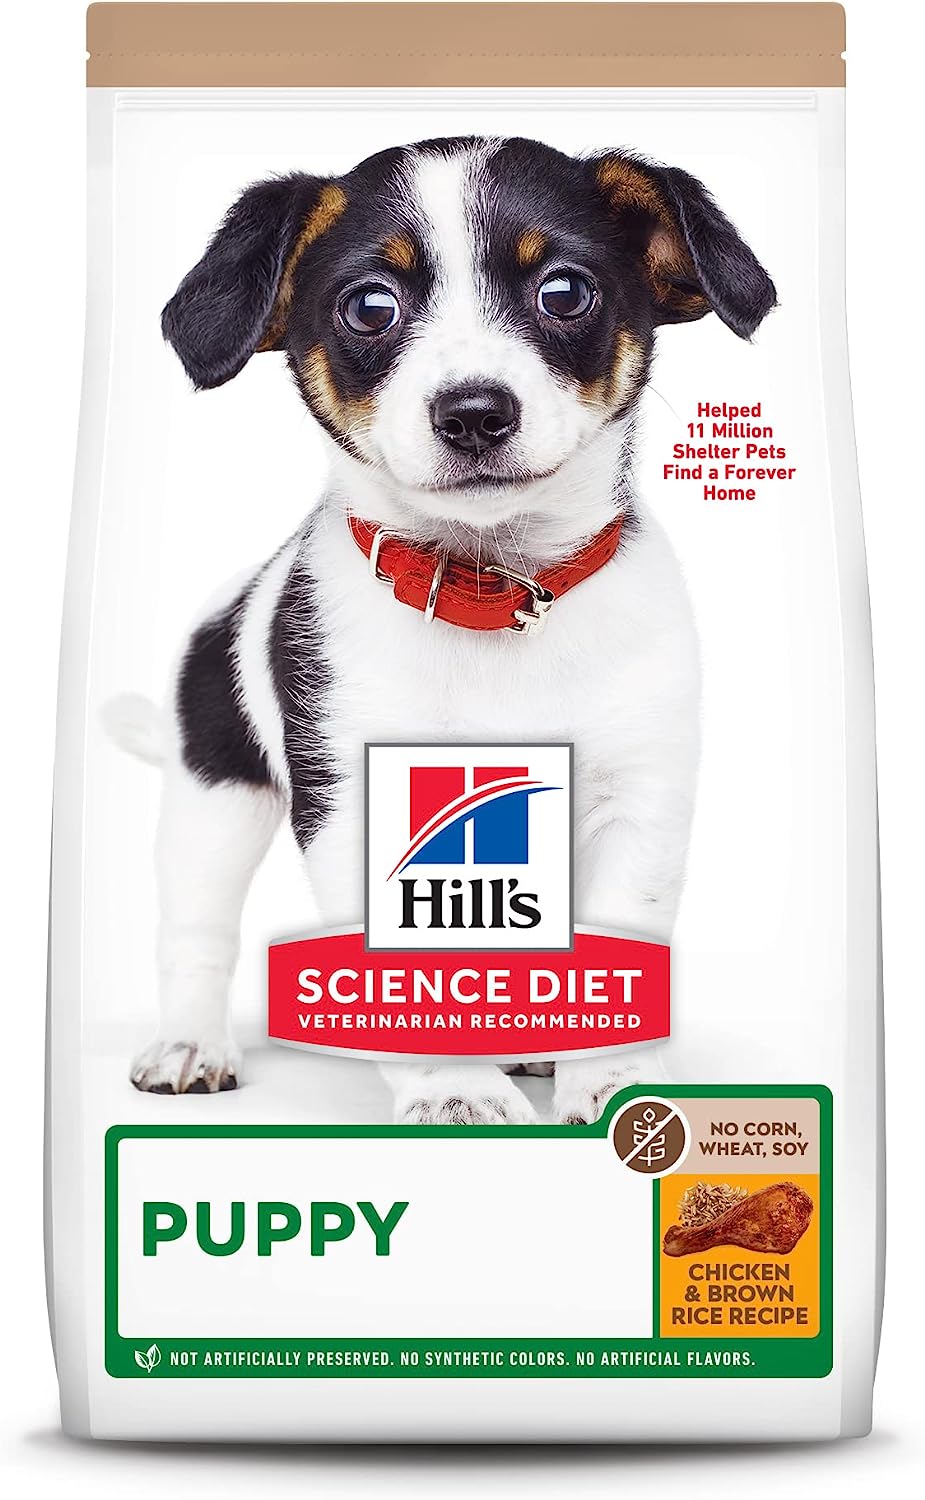 Hill’s Science Diet Puppy Chicken & Brown Rice Recipe No Corn, Wheat, Soy Dry Dog Food – Gallery Image 1